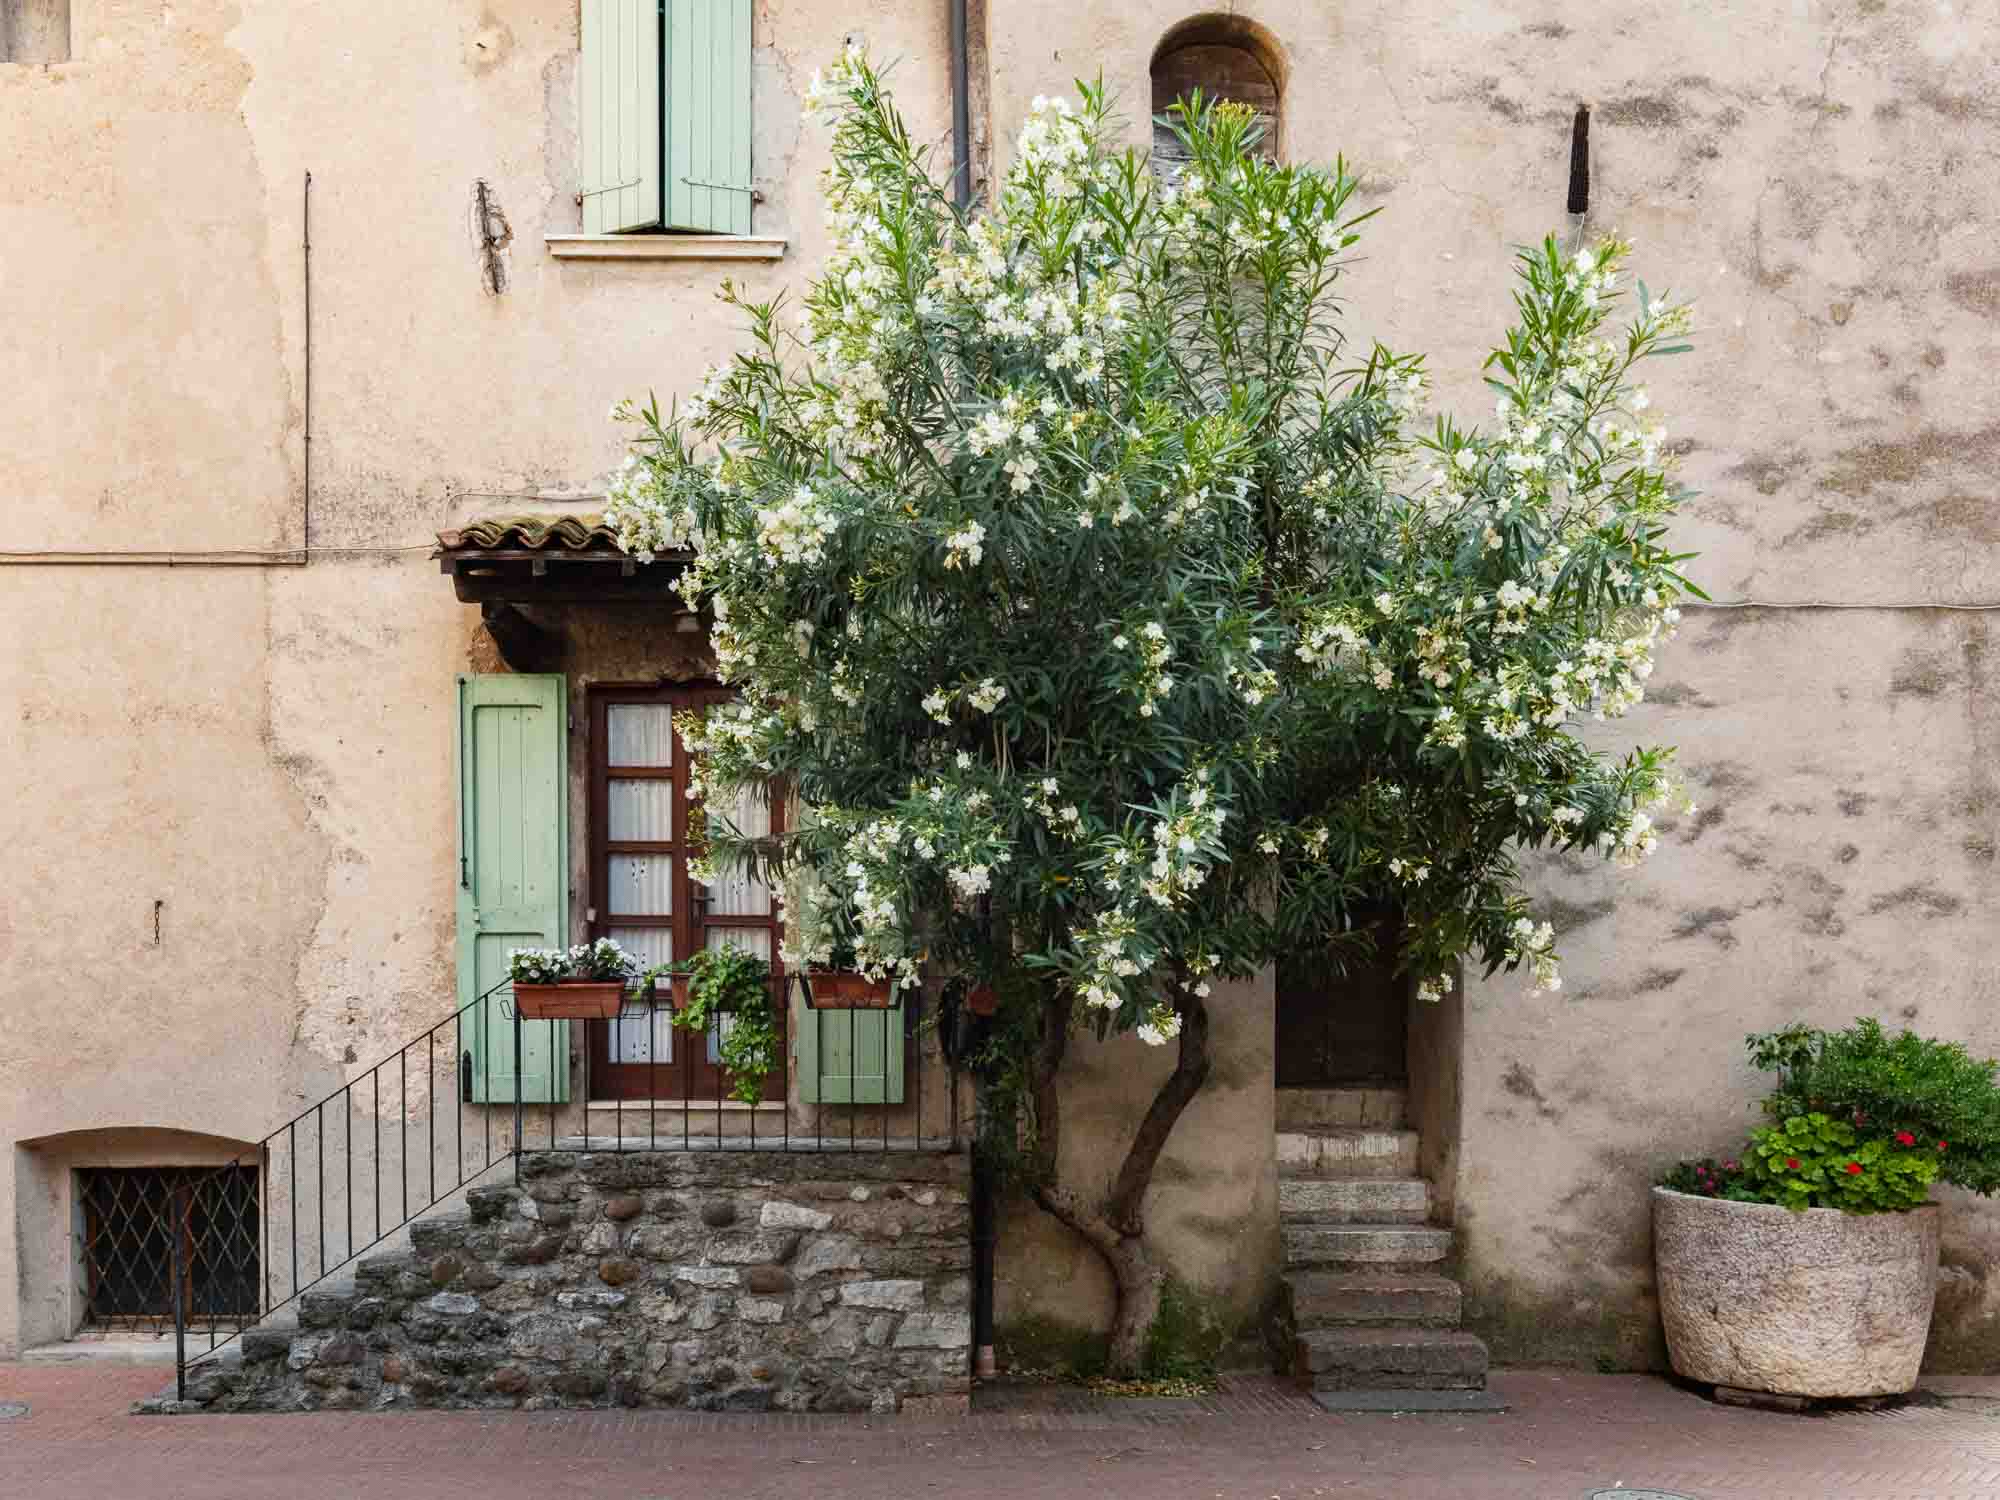 Quaint Italian house with a flowering oleander tree, stone steps, green shutters, and a large potted plant in Sirmione, Italy.